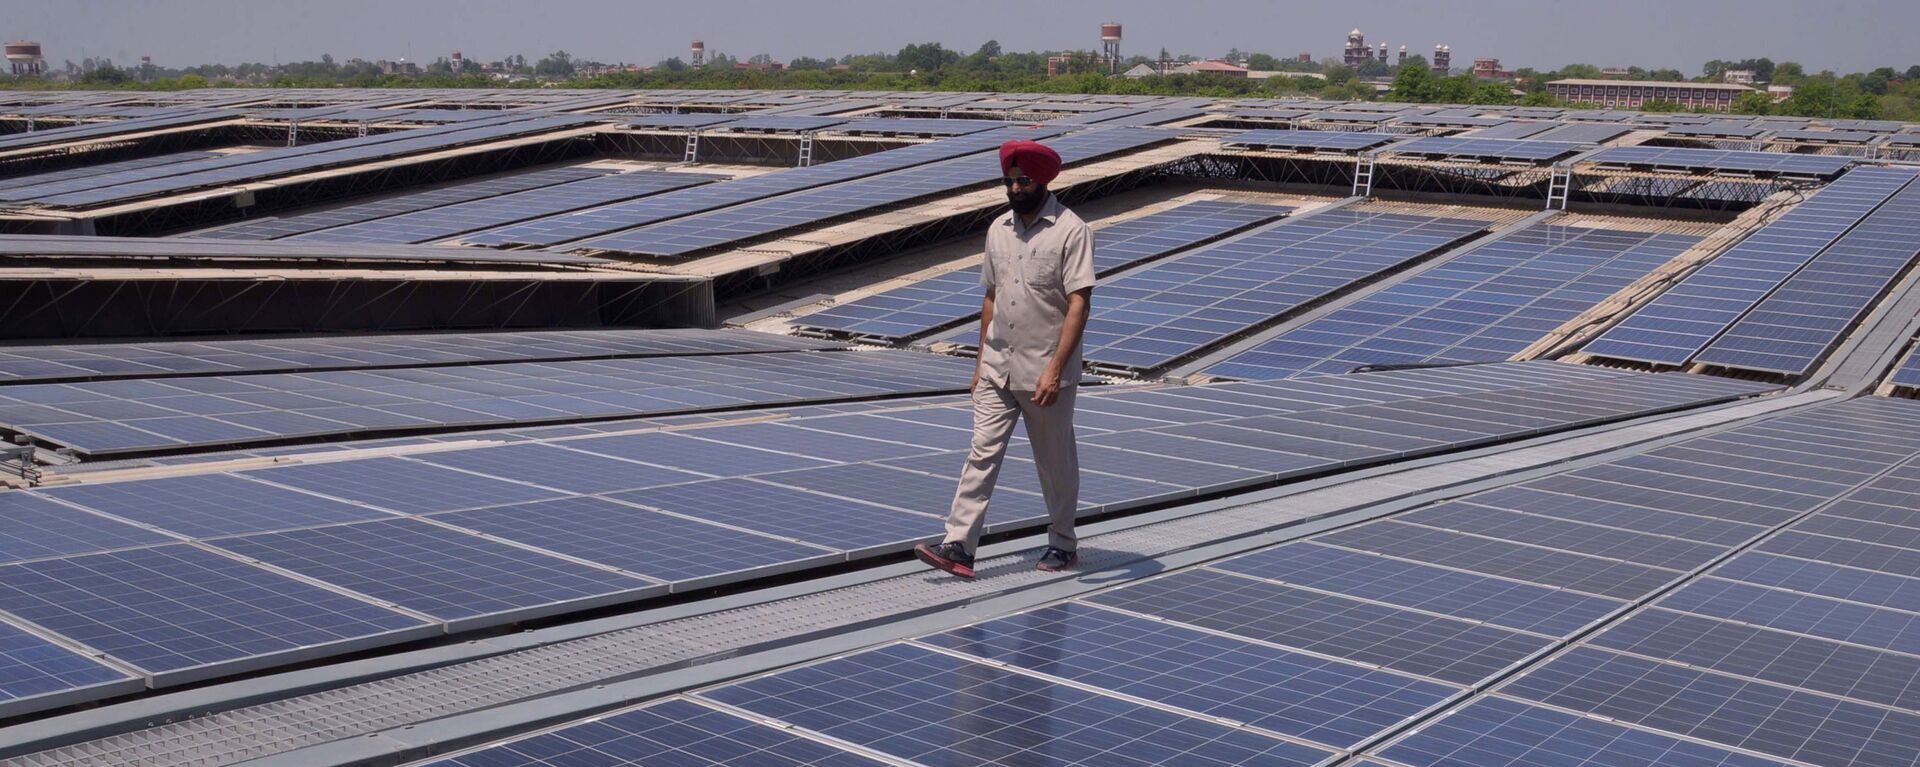 An Indian security personnel poses for media as he walks over rooftops covered in solar panels at the Solar Photovoltaic Power Plant, some 45kms from Amritsar. (File) - Sputnik India, 1920, 04.01.2023